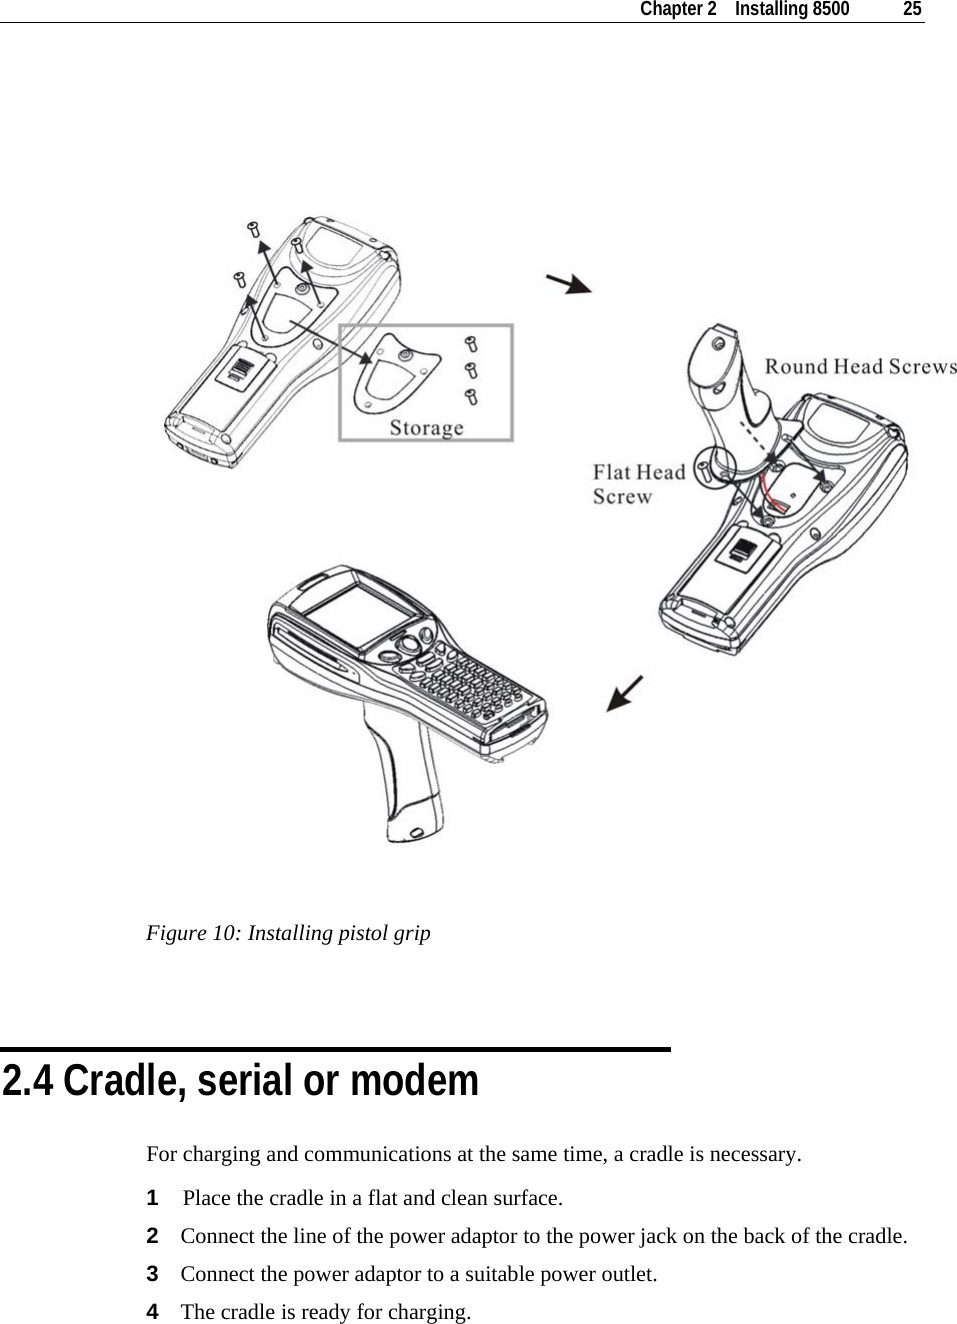    Chapter 2    Installing 8500  25     Figure 10: Installing pistol grip   2.4 Cradle, serial or modem For charging and communications at the same time, a cradle is necessary. 1  Place the cradle in a flat and clean surface. 2  Connect the line of the power adaptor to the power jack on the back of the cradle. 3  Connect the power adaptor to a suitable power outlet. 4  The cradle is ready for charging. 